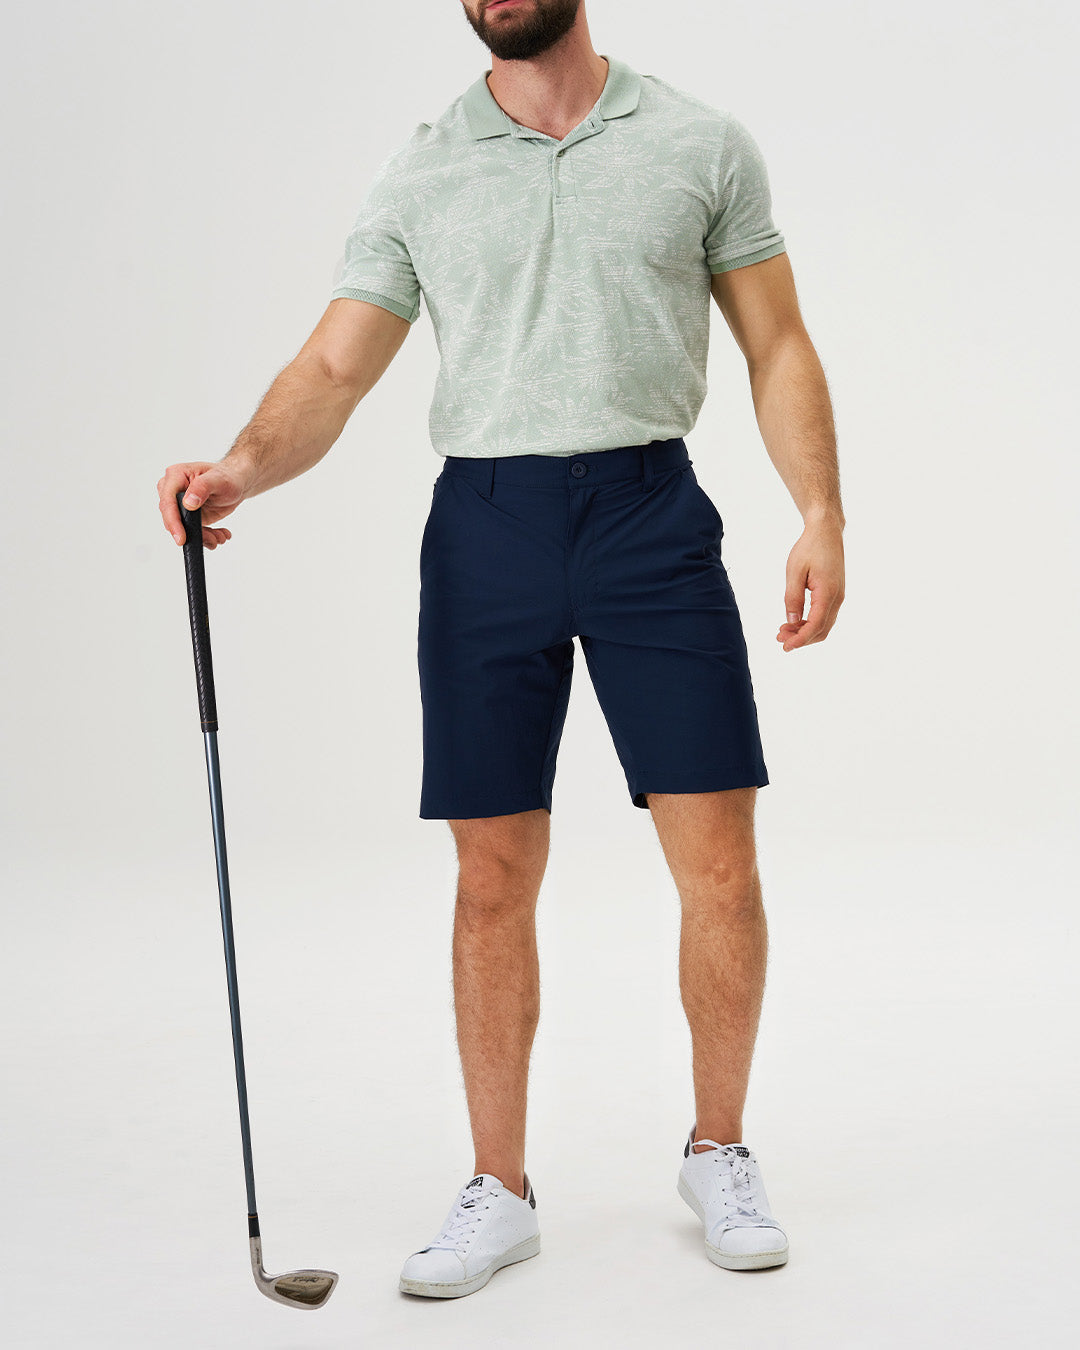 Golf Shorts, Everyday Casual